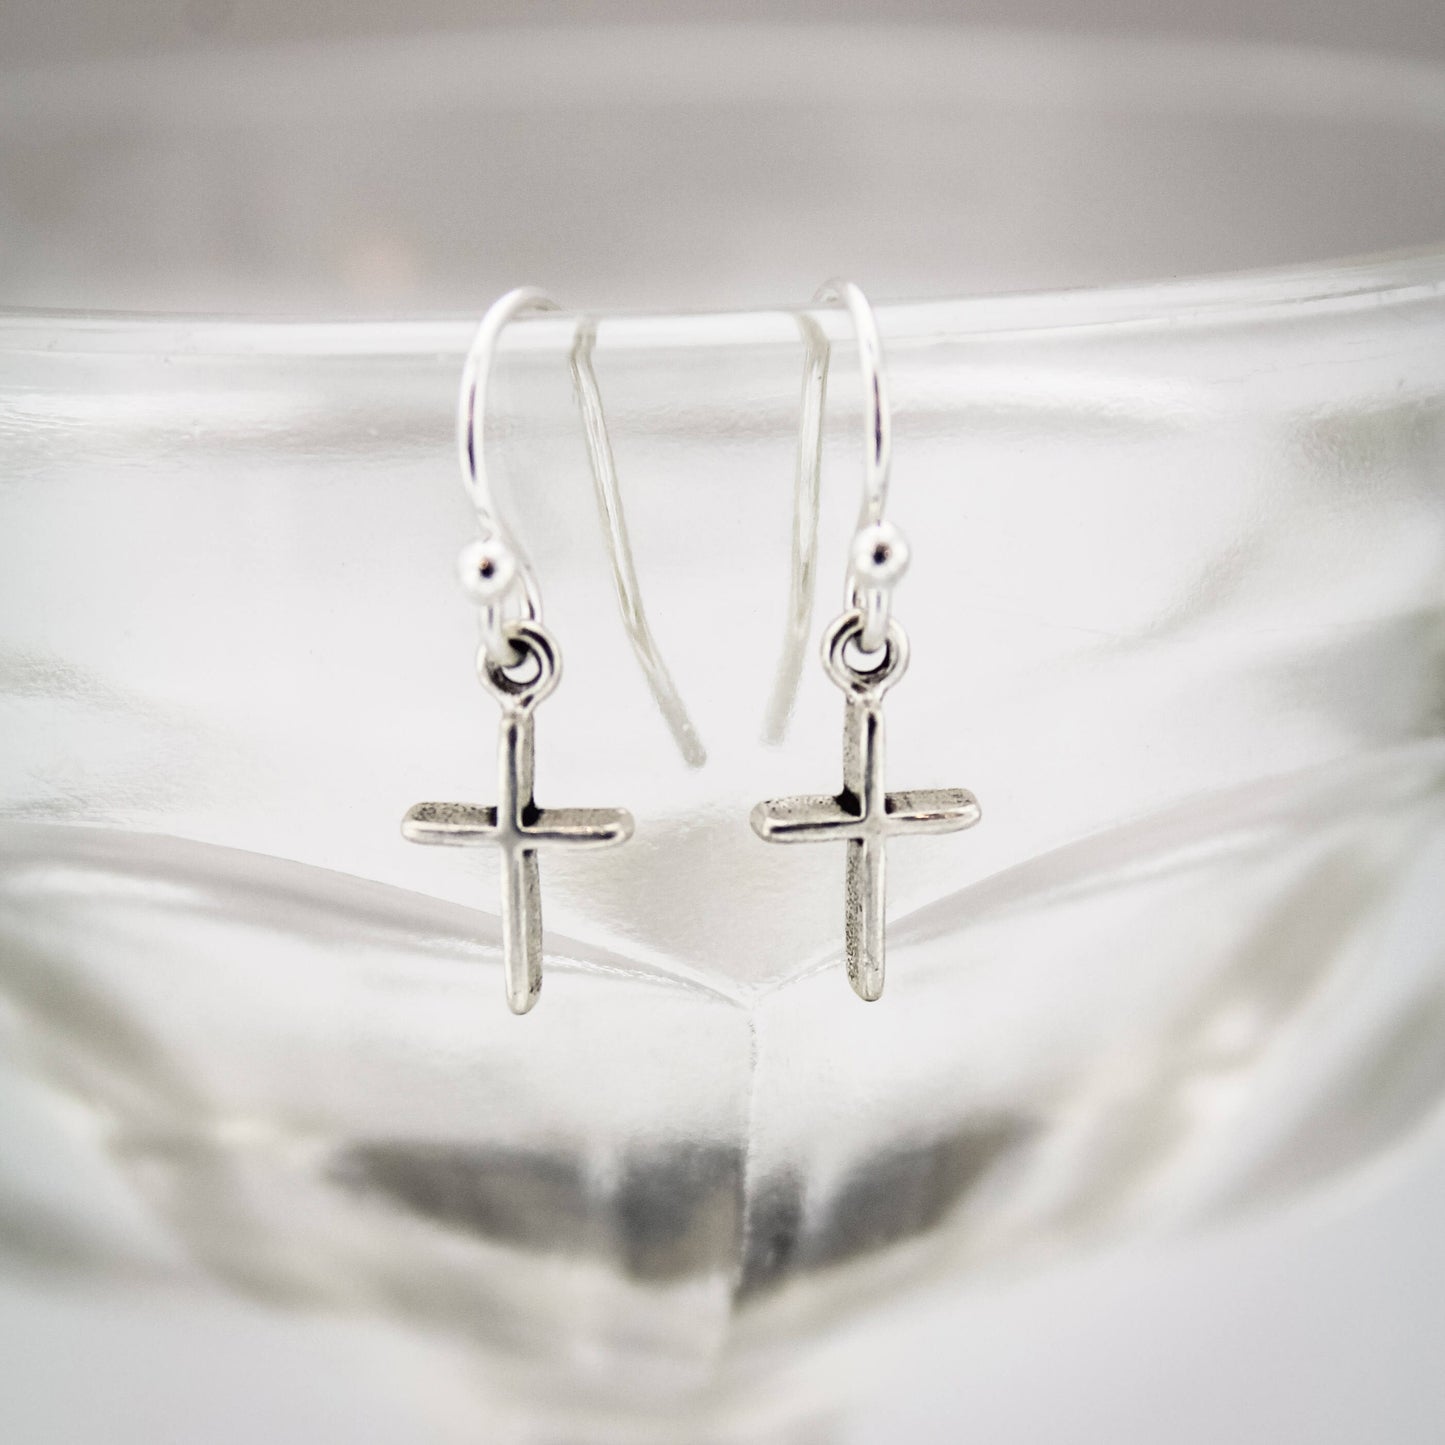 Tiny Sterling Silver Cross Earrings, Minimal Cross Earrings, Sterling Silver Earrings, Faith Earrings, Confirmation Holy Communion  Earrings